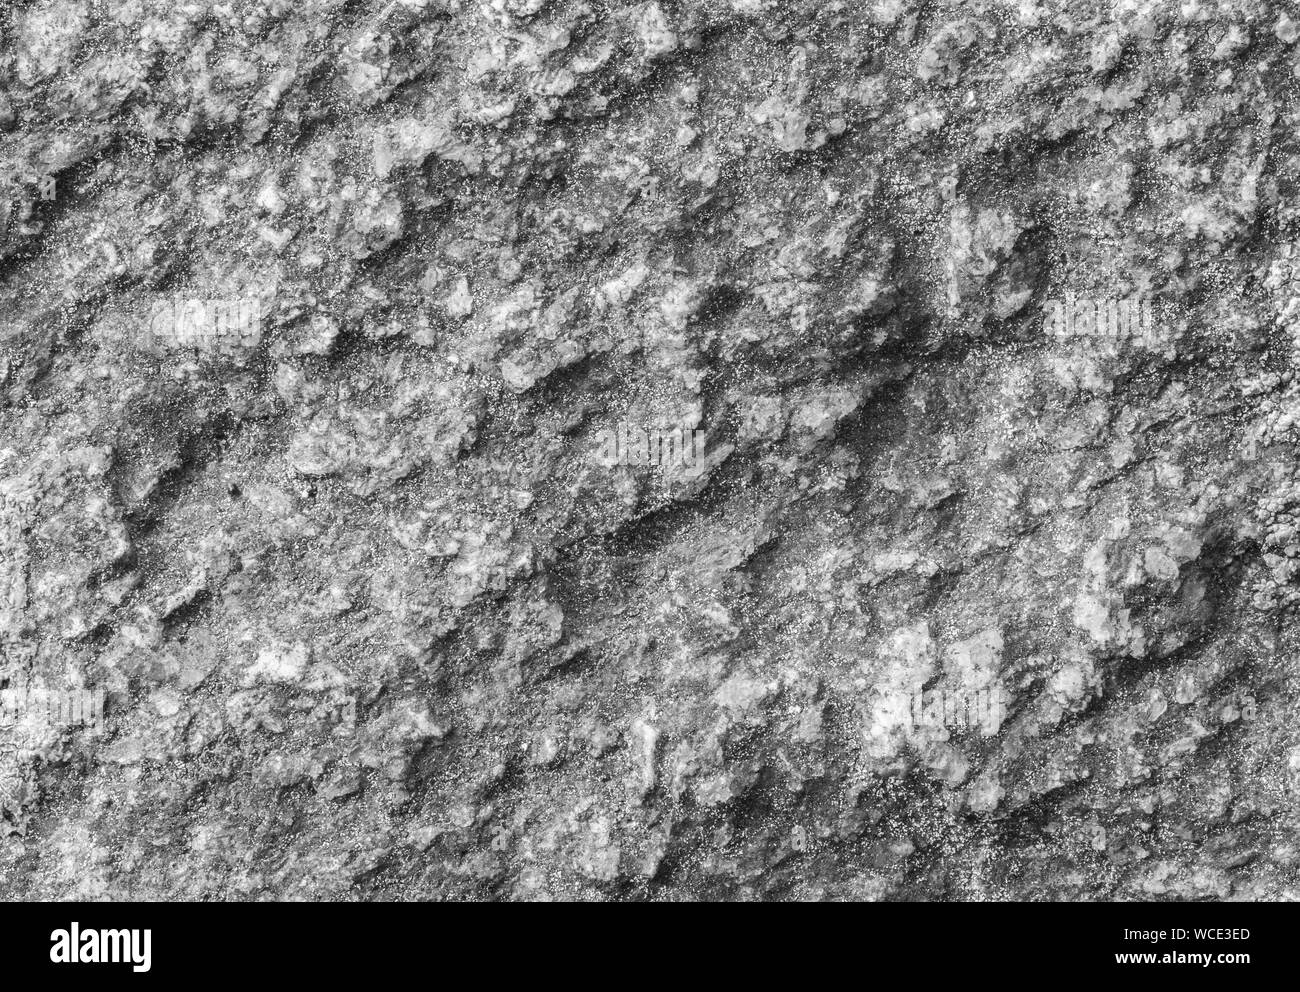 Macro close-up of a rough rock surface with fine grains of sand in black and white. High resolution full frame textured background. Stock Photo